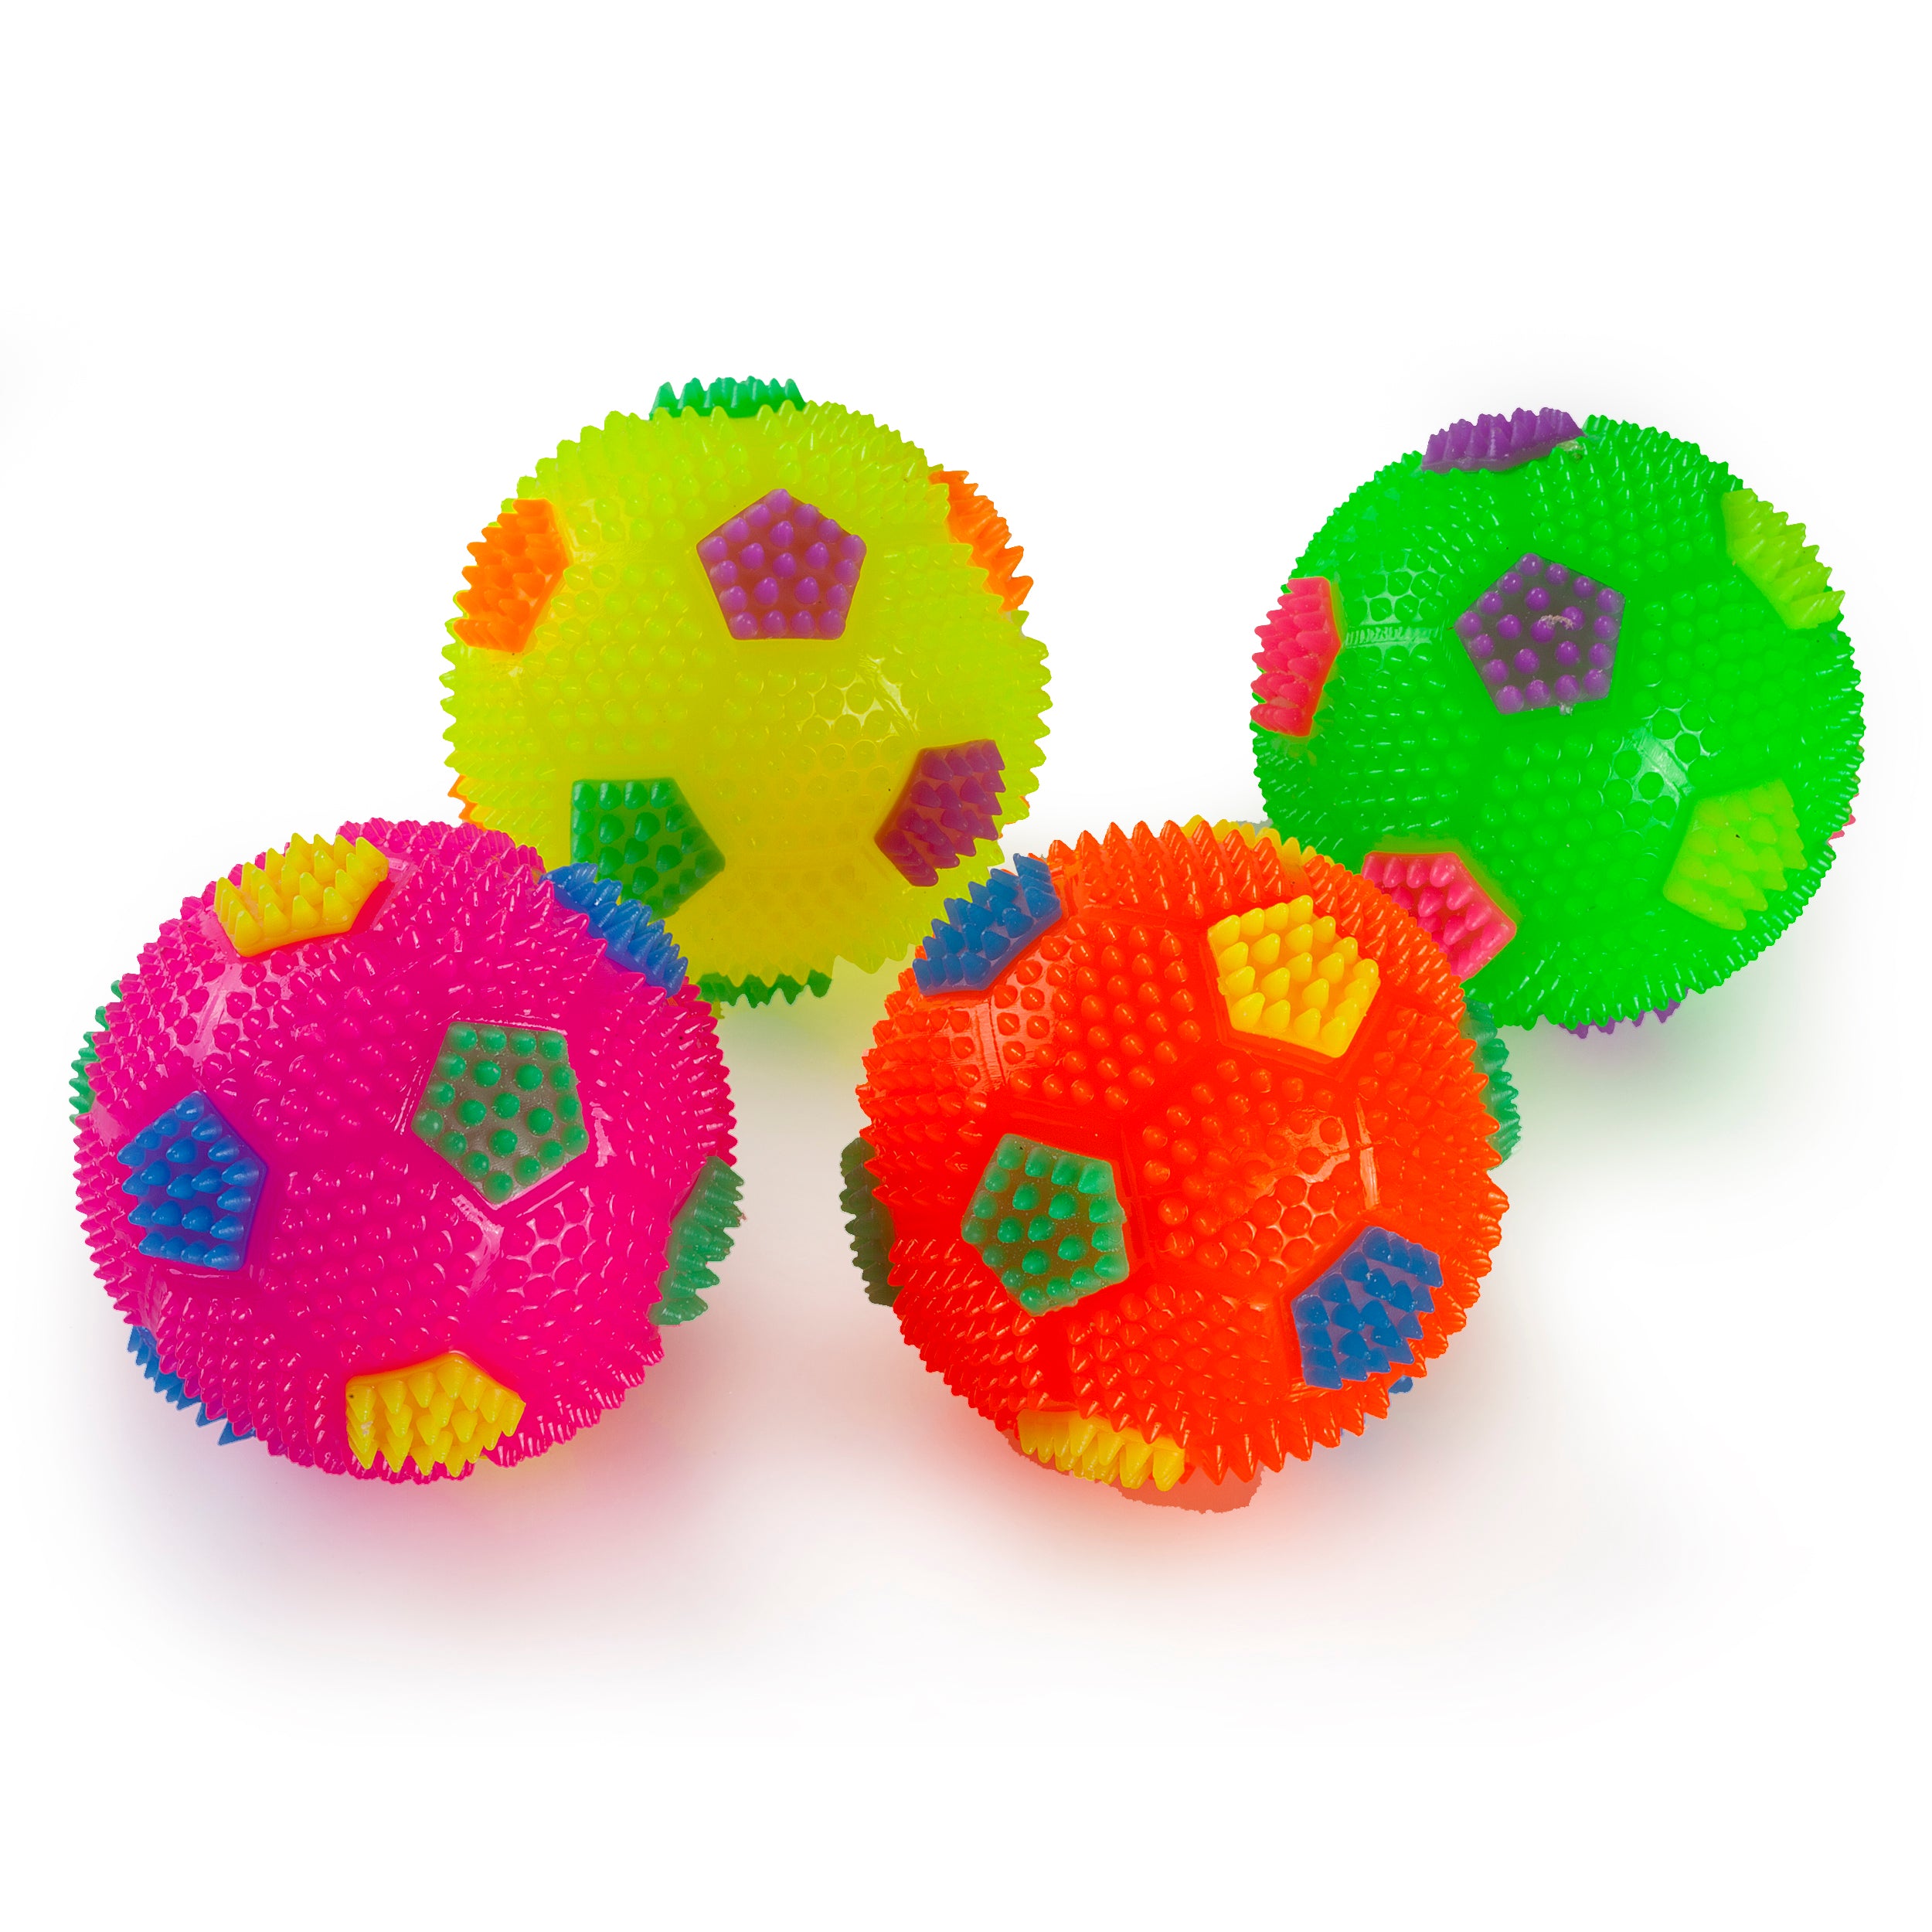 Soccer Toys - 2" Light up Miniature Toy Soccer Balls Assorted Colors